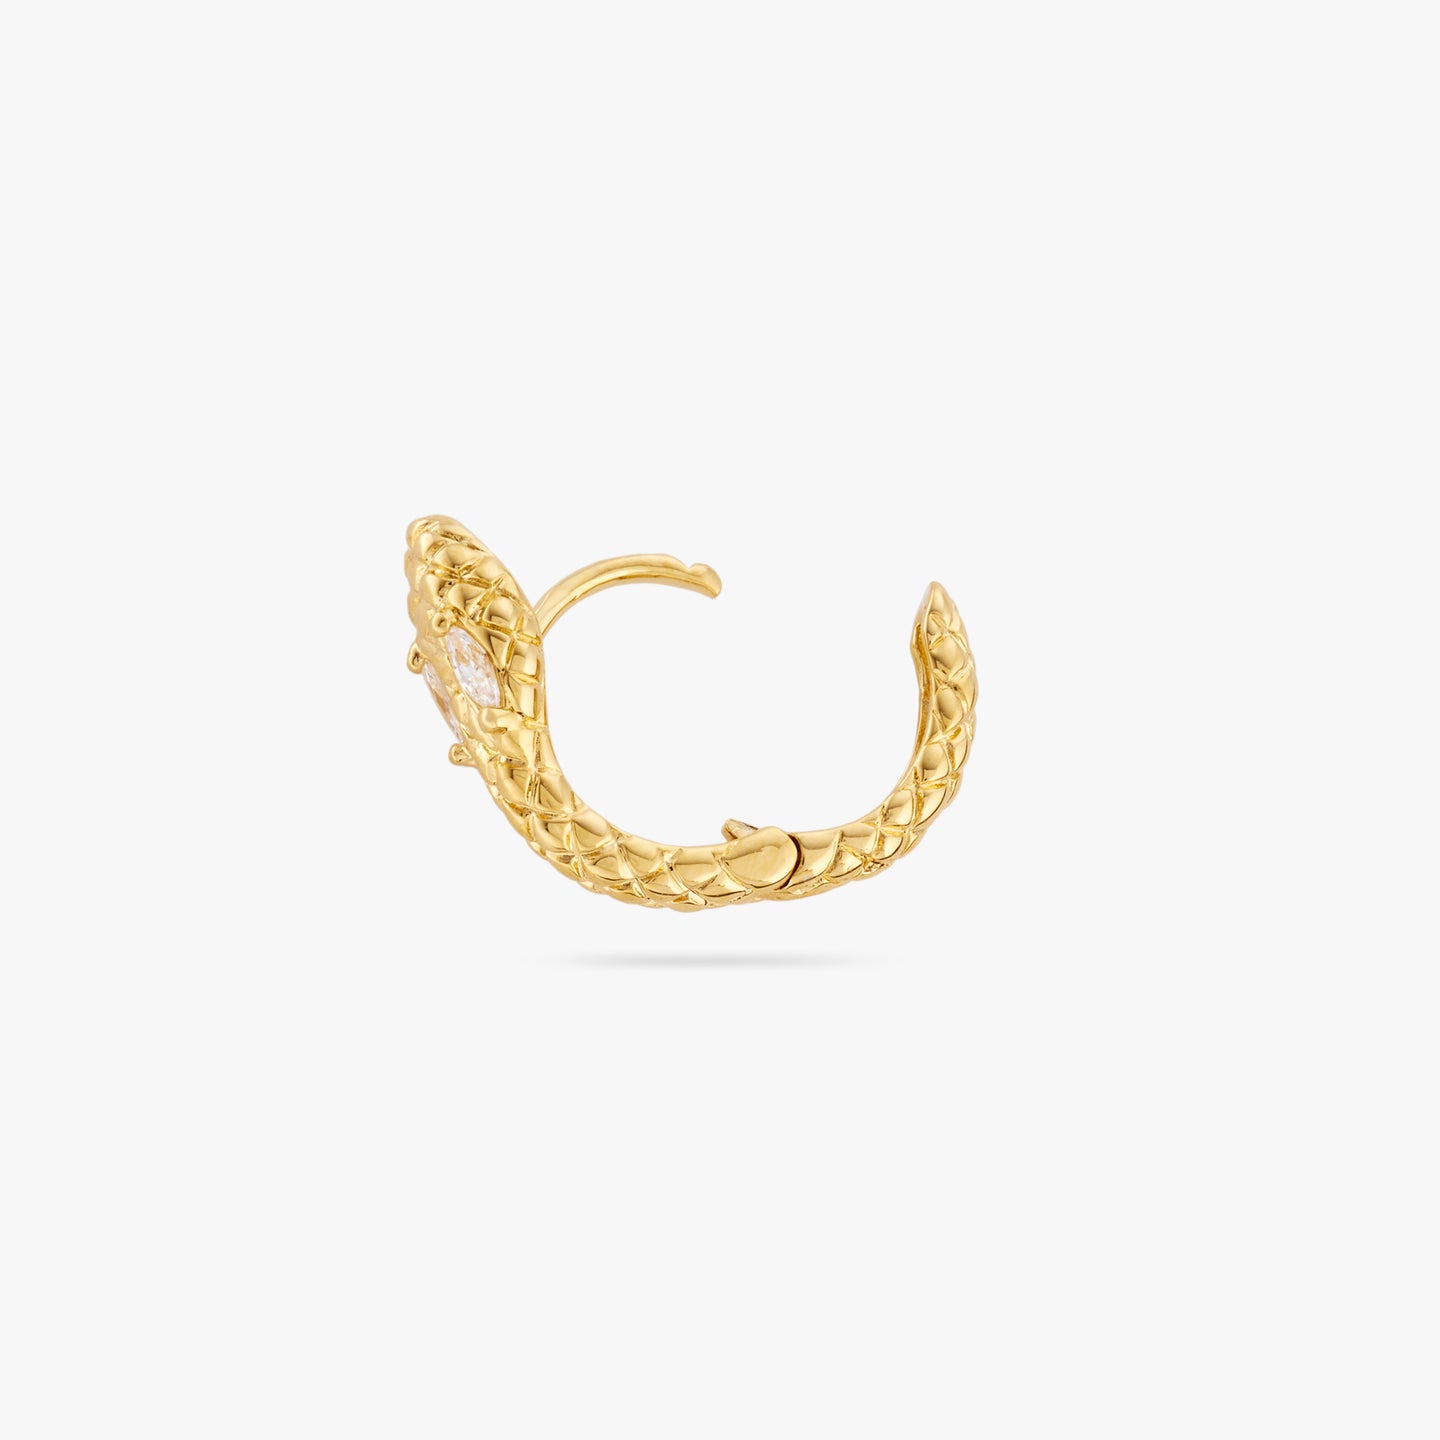 This is a gold serpent shaped huggie earring with clear CZ eyes and its clasp undone color:null|gold